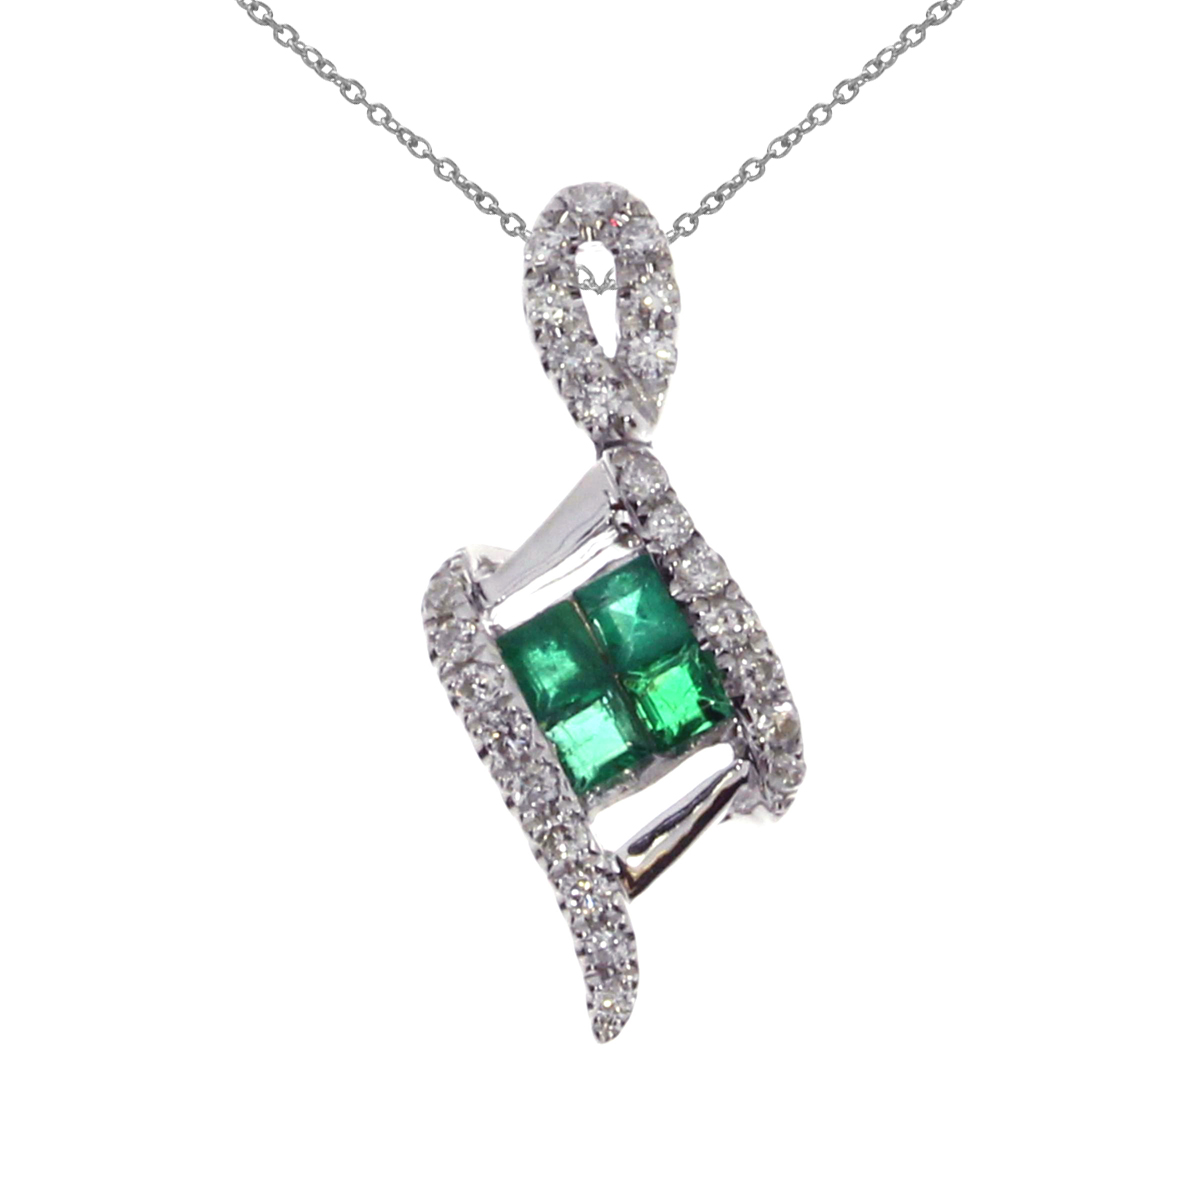 Four princess cut emeralds within a beautiful 14k white gold and .12 ct diamond design.